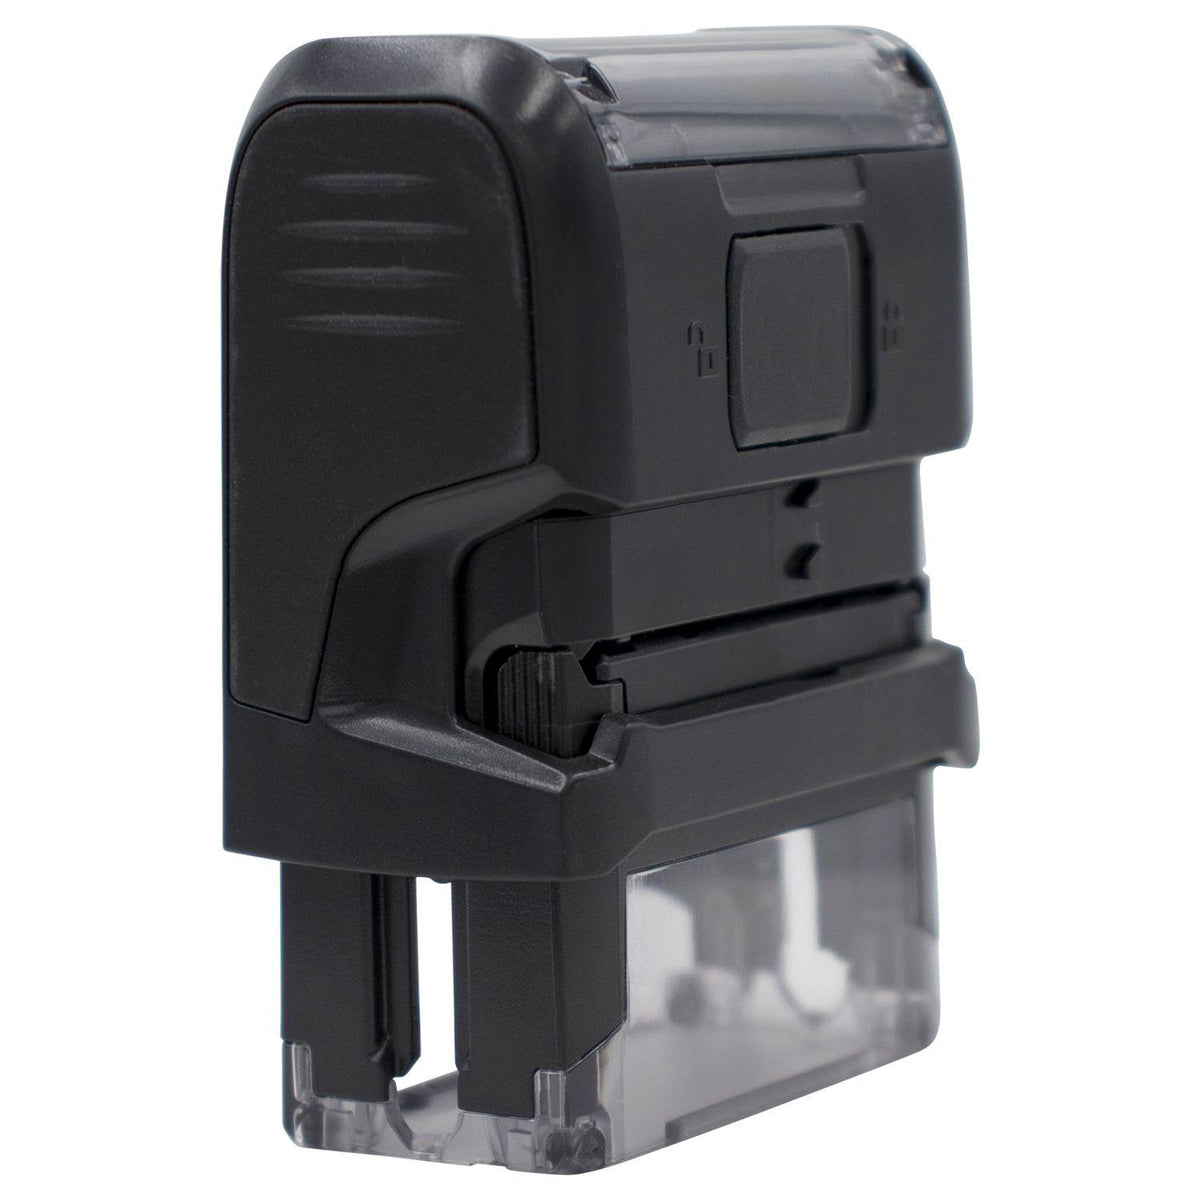 Large Self Inking Application Complete Stamp Back View